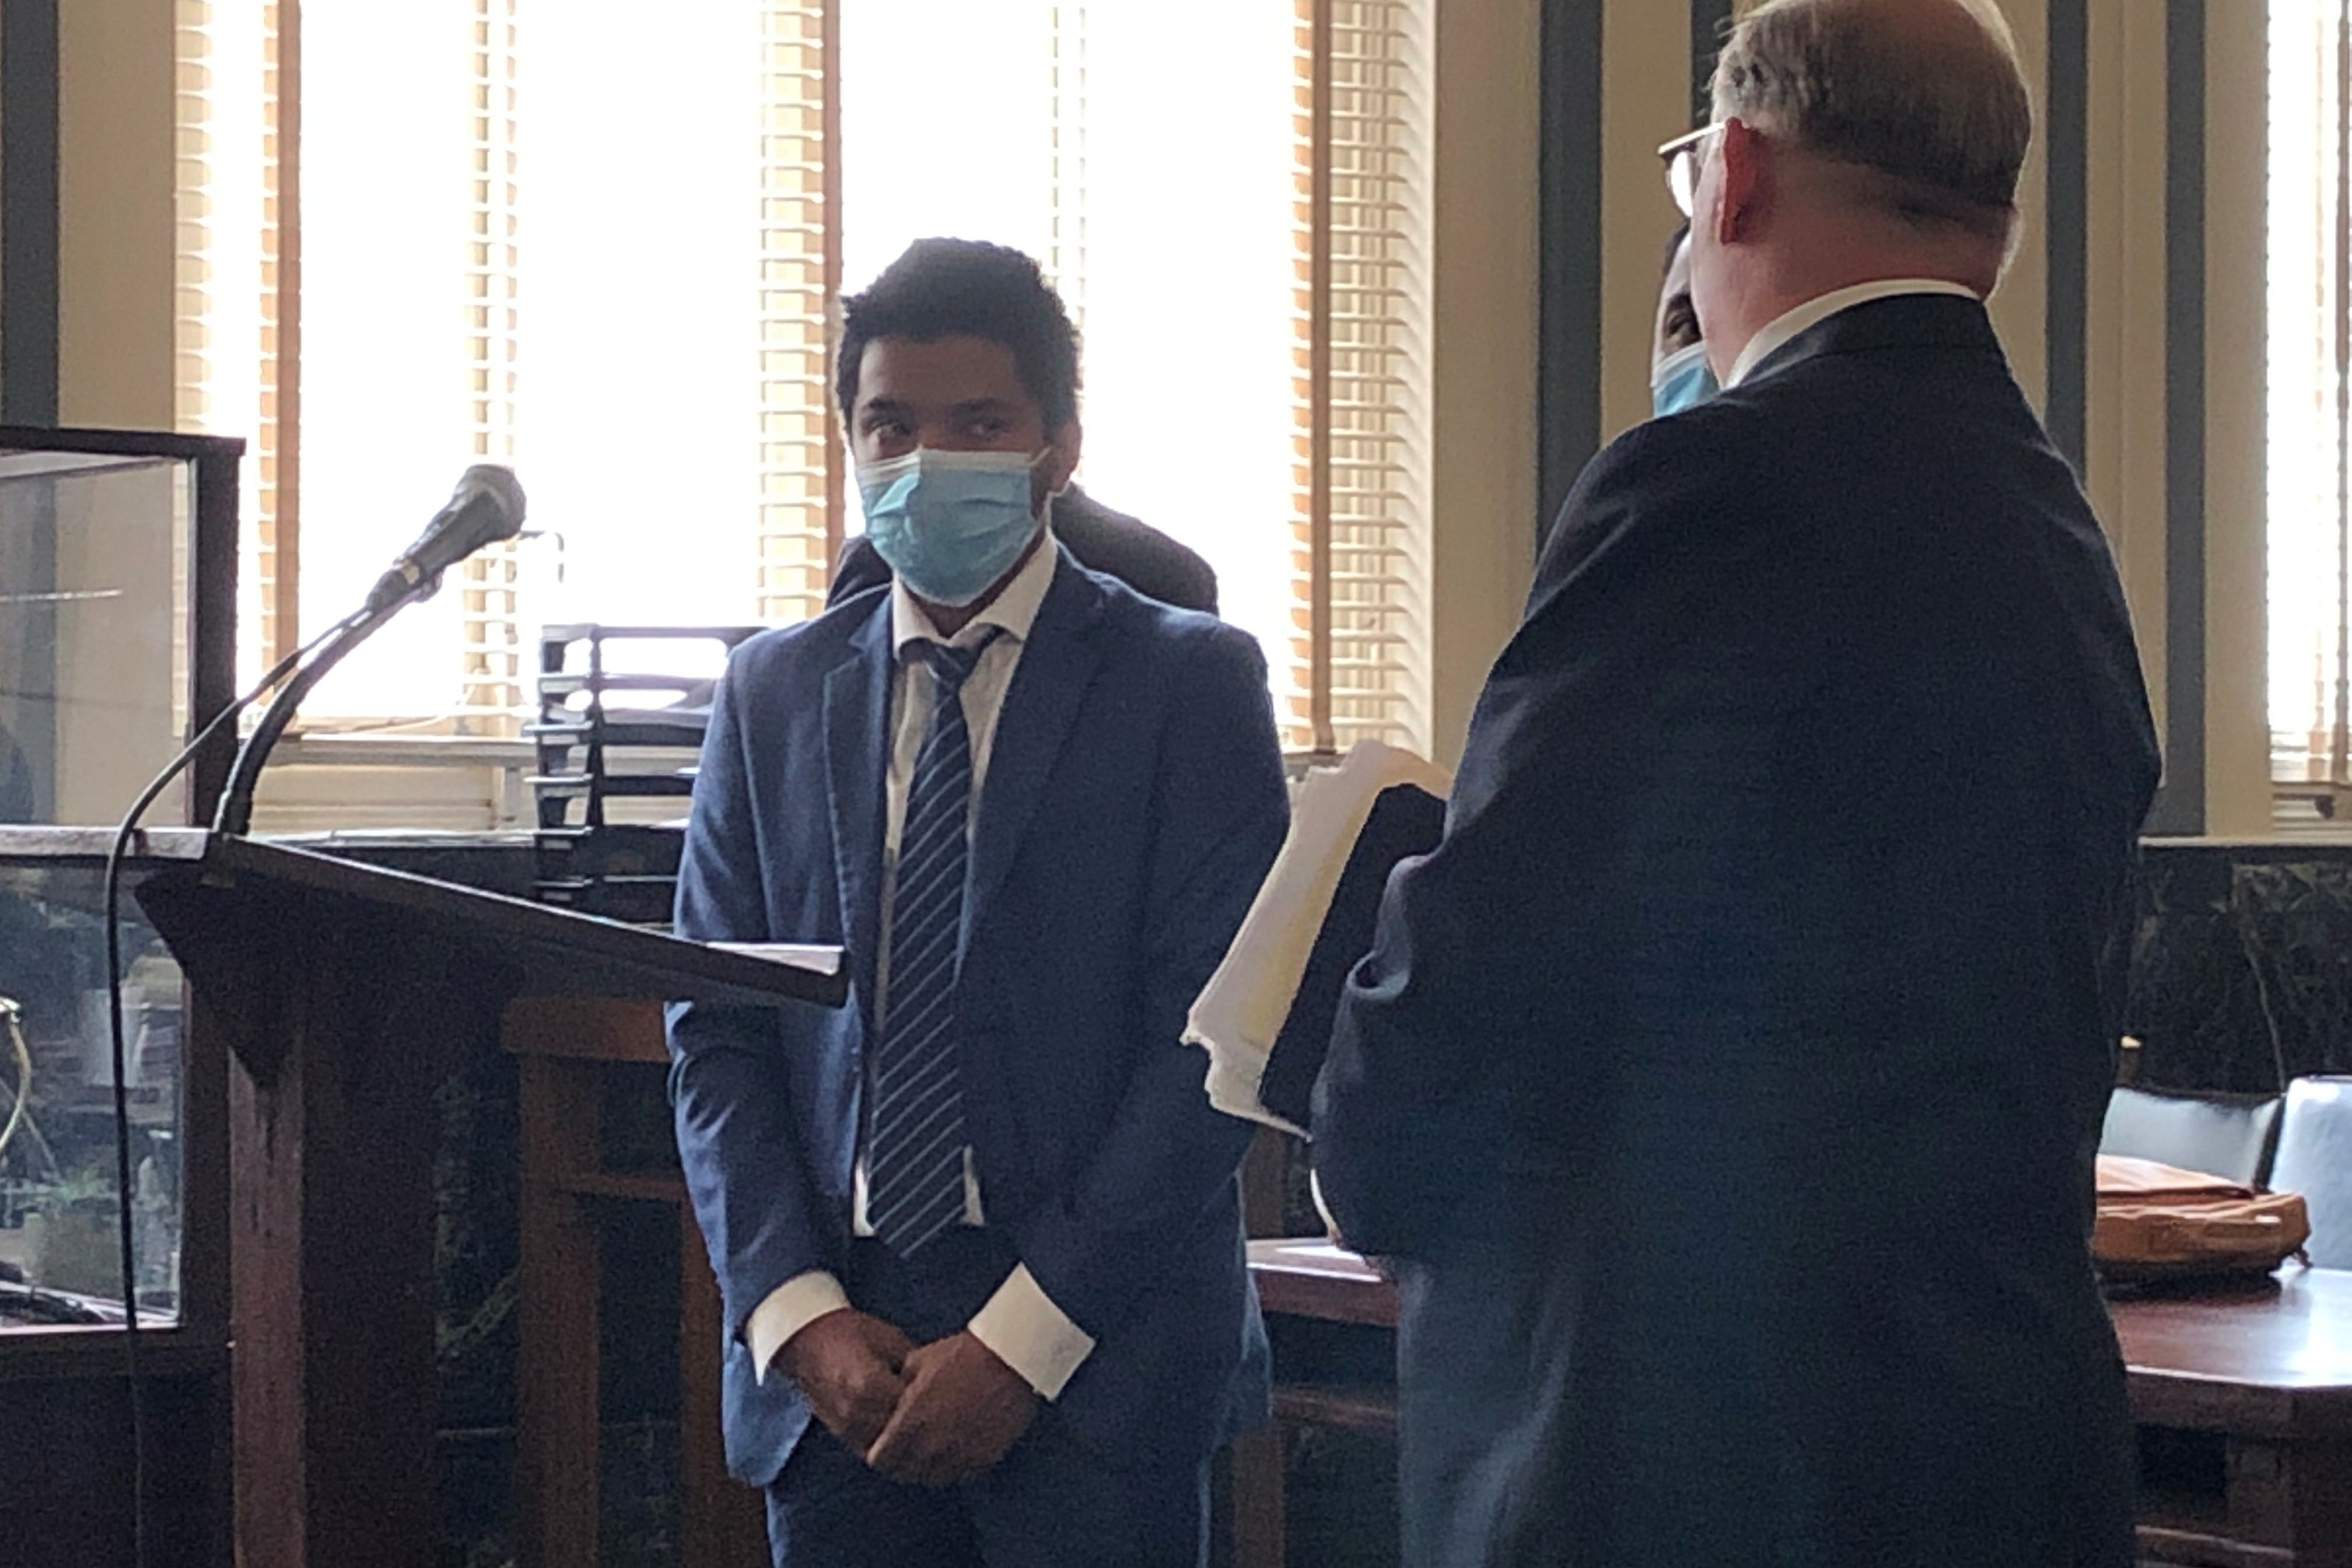 Samuel Darjee, a refugee from Nepal, pleaded guilty and was sentenced Wednesday, July 21, 2021 to six months in prison, for having sex with a 14-year-old girl when he was 18. The case was in Hamilton County Common Pleas Court before Judge Wende Cross.